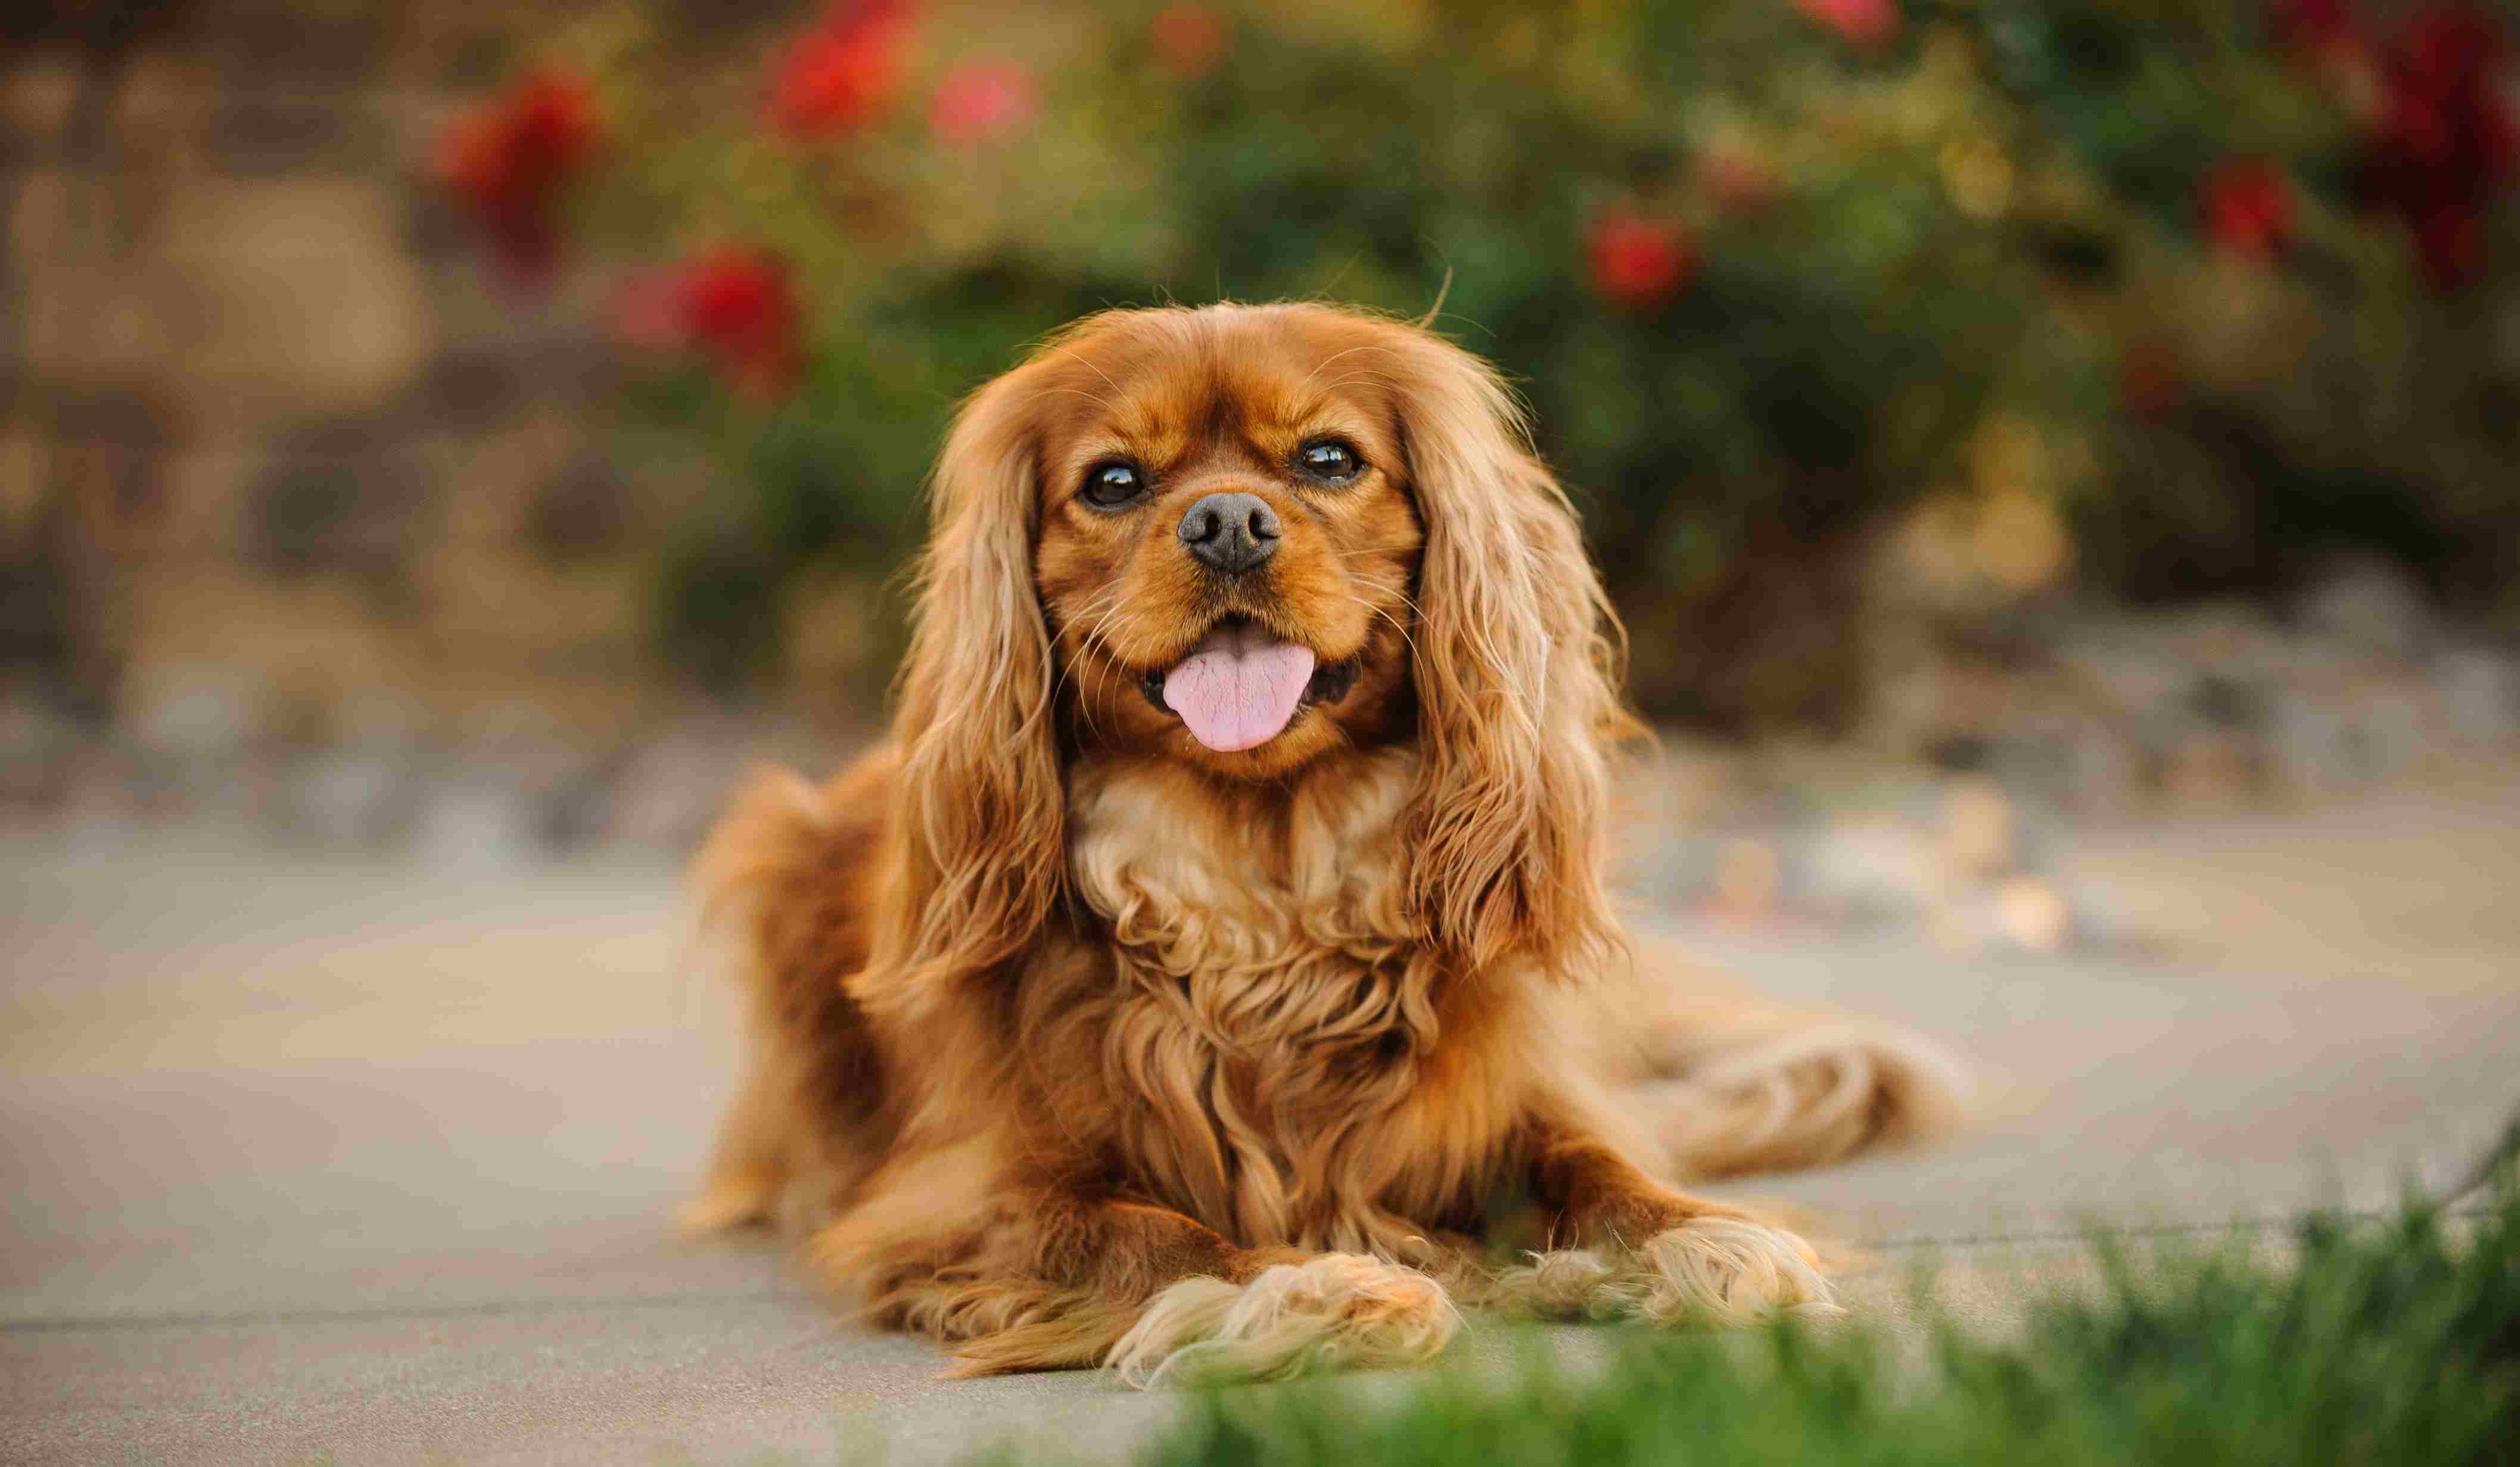 Cavalier King Charles spaniel lying outside and smiling